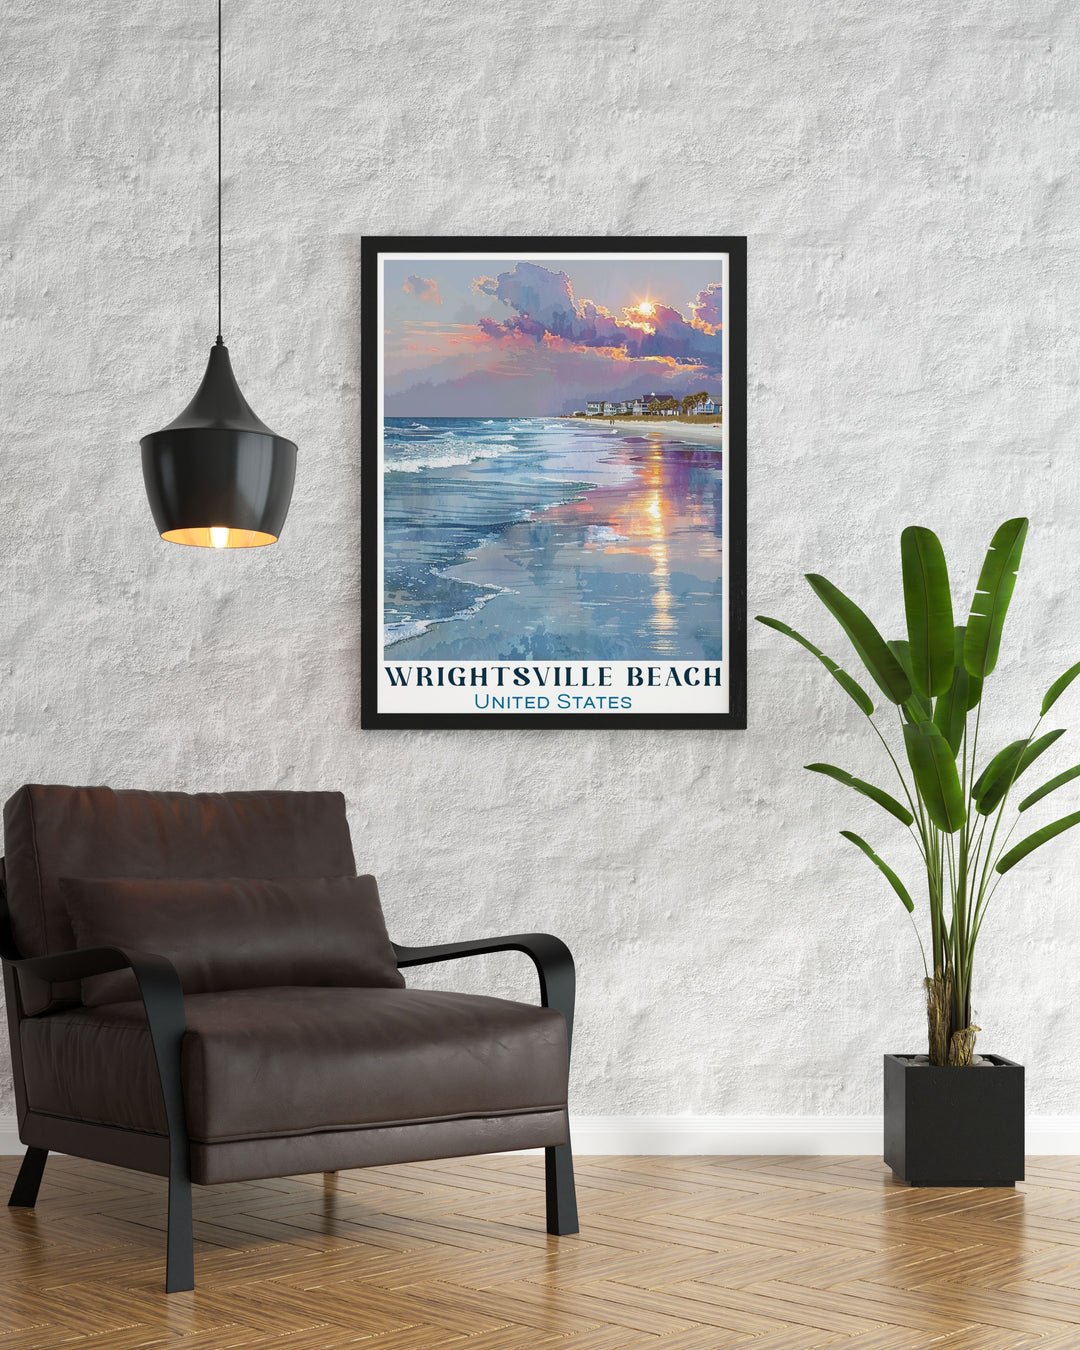 Canvas art depicting the serene beauty and lively spirit of Wrightsville Beach, North Carolina. This artwork captures the stunning shoreline and vibrant community, adding a sense of coastal charm and elegance to your home or office decor.